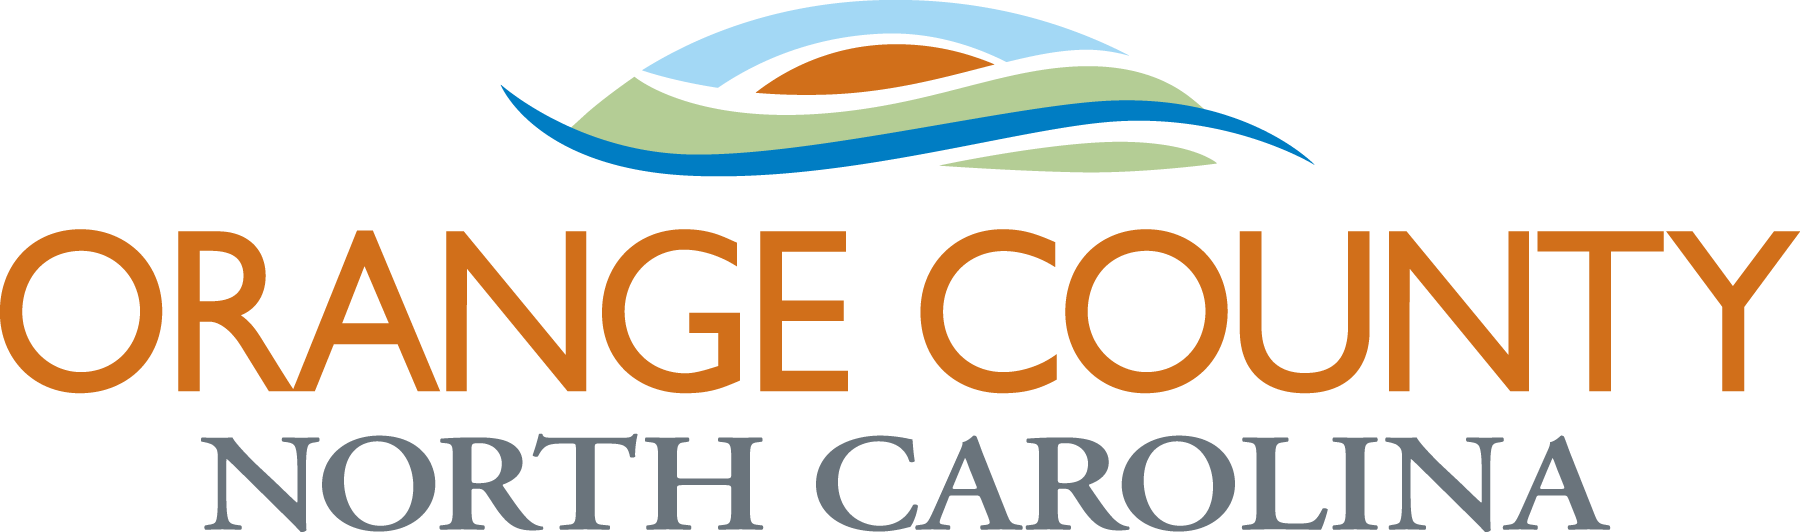 Orange Co Logo - Find Where You Vote and Who Your Elected Officials Are